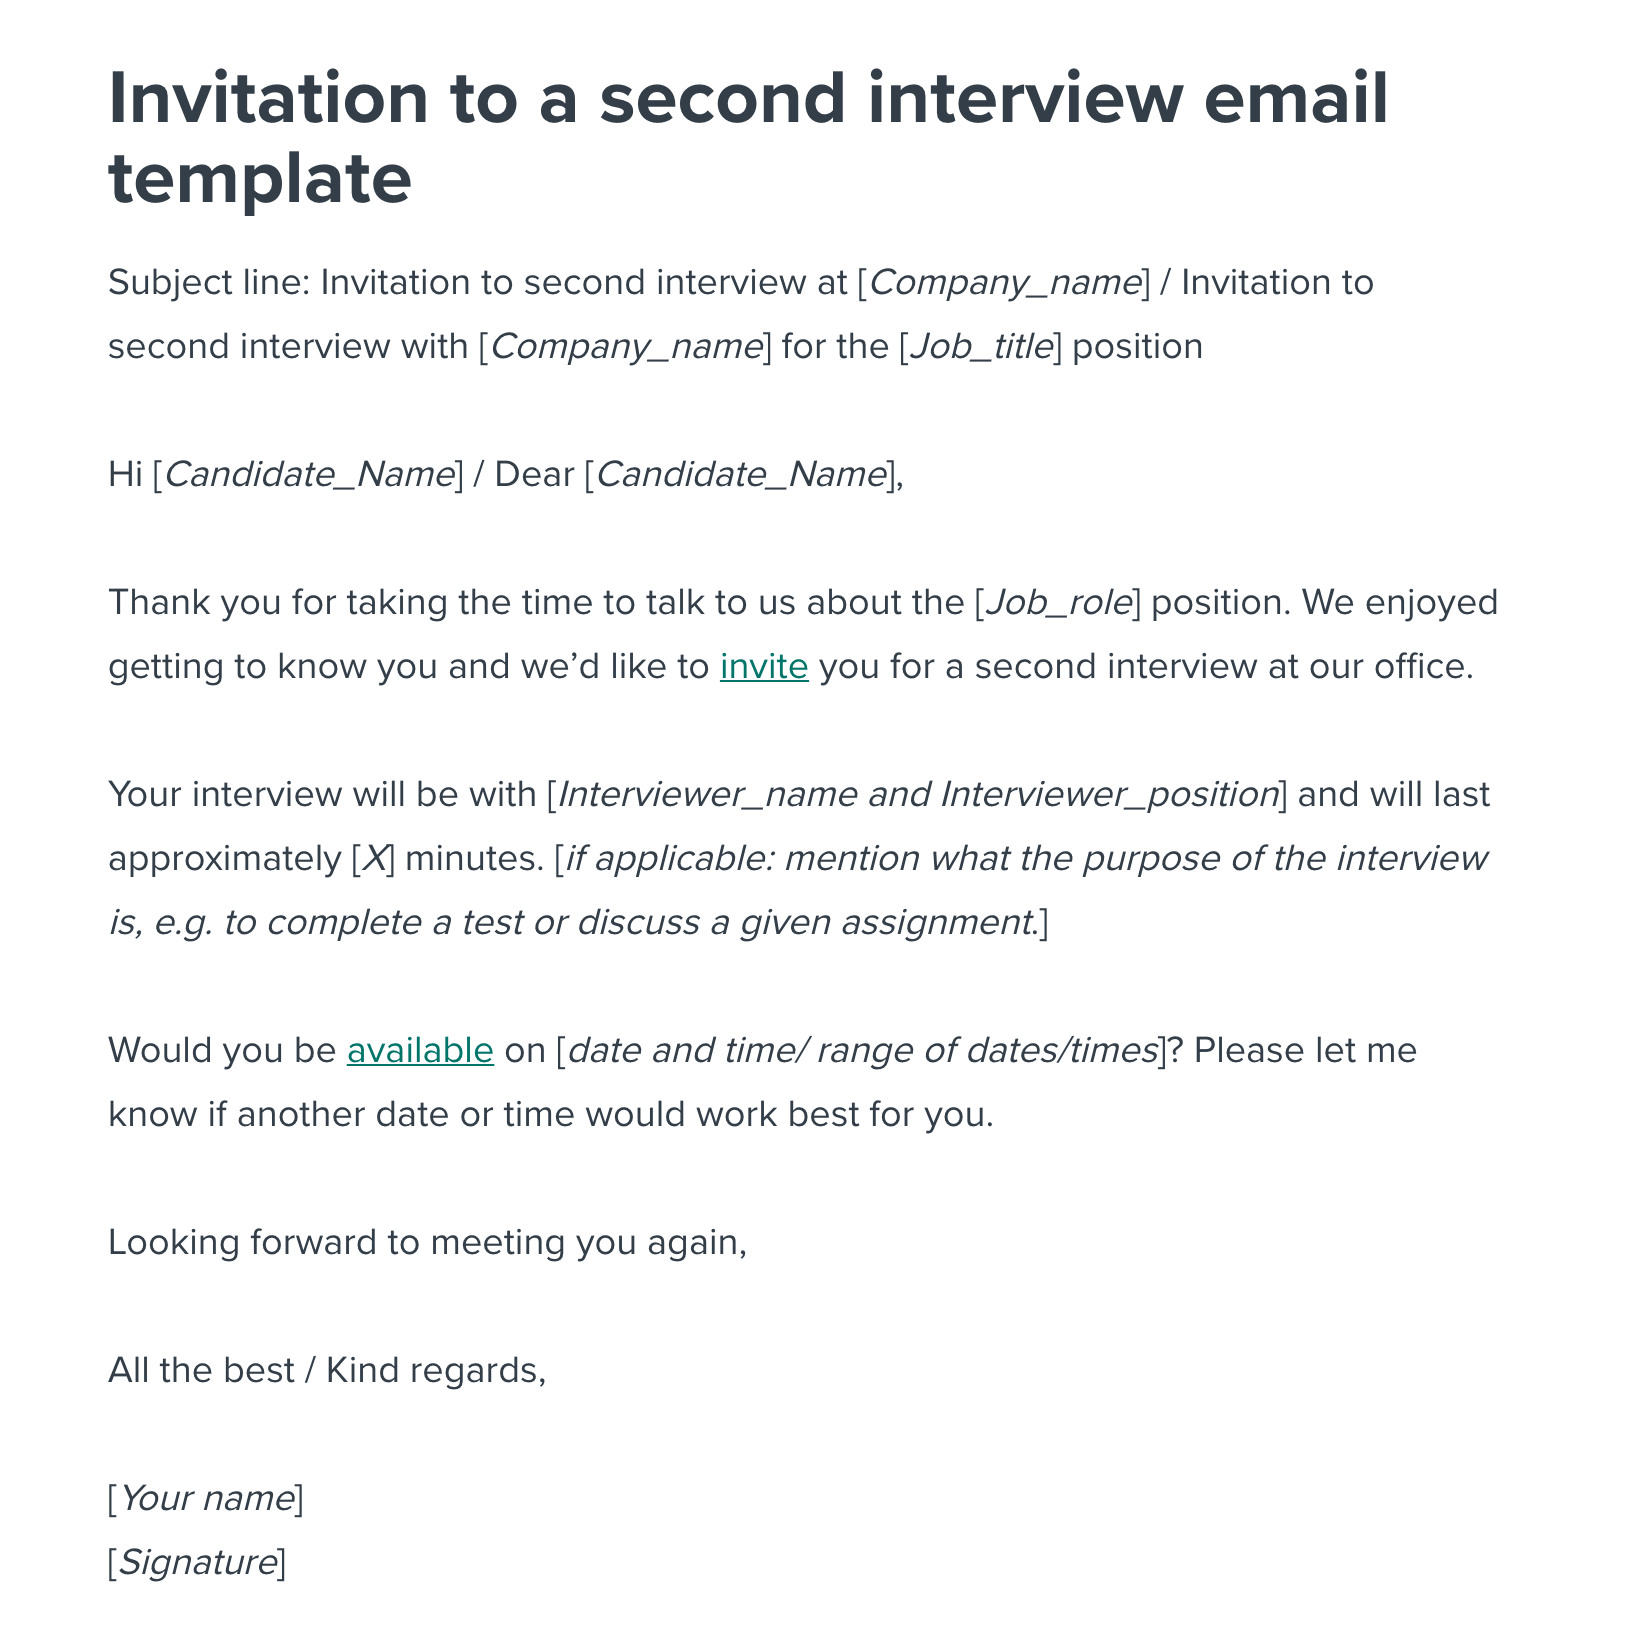 second-interview-invitation-email-template-workable